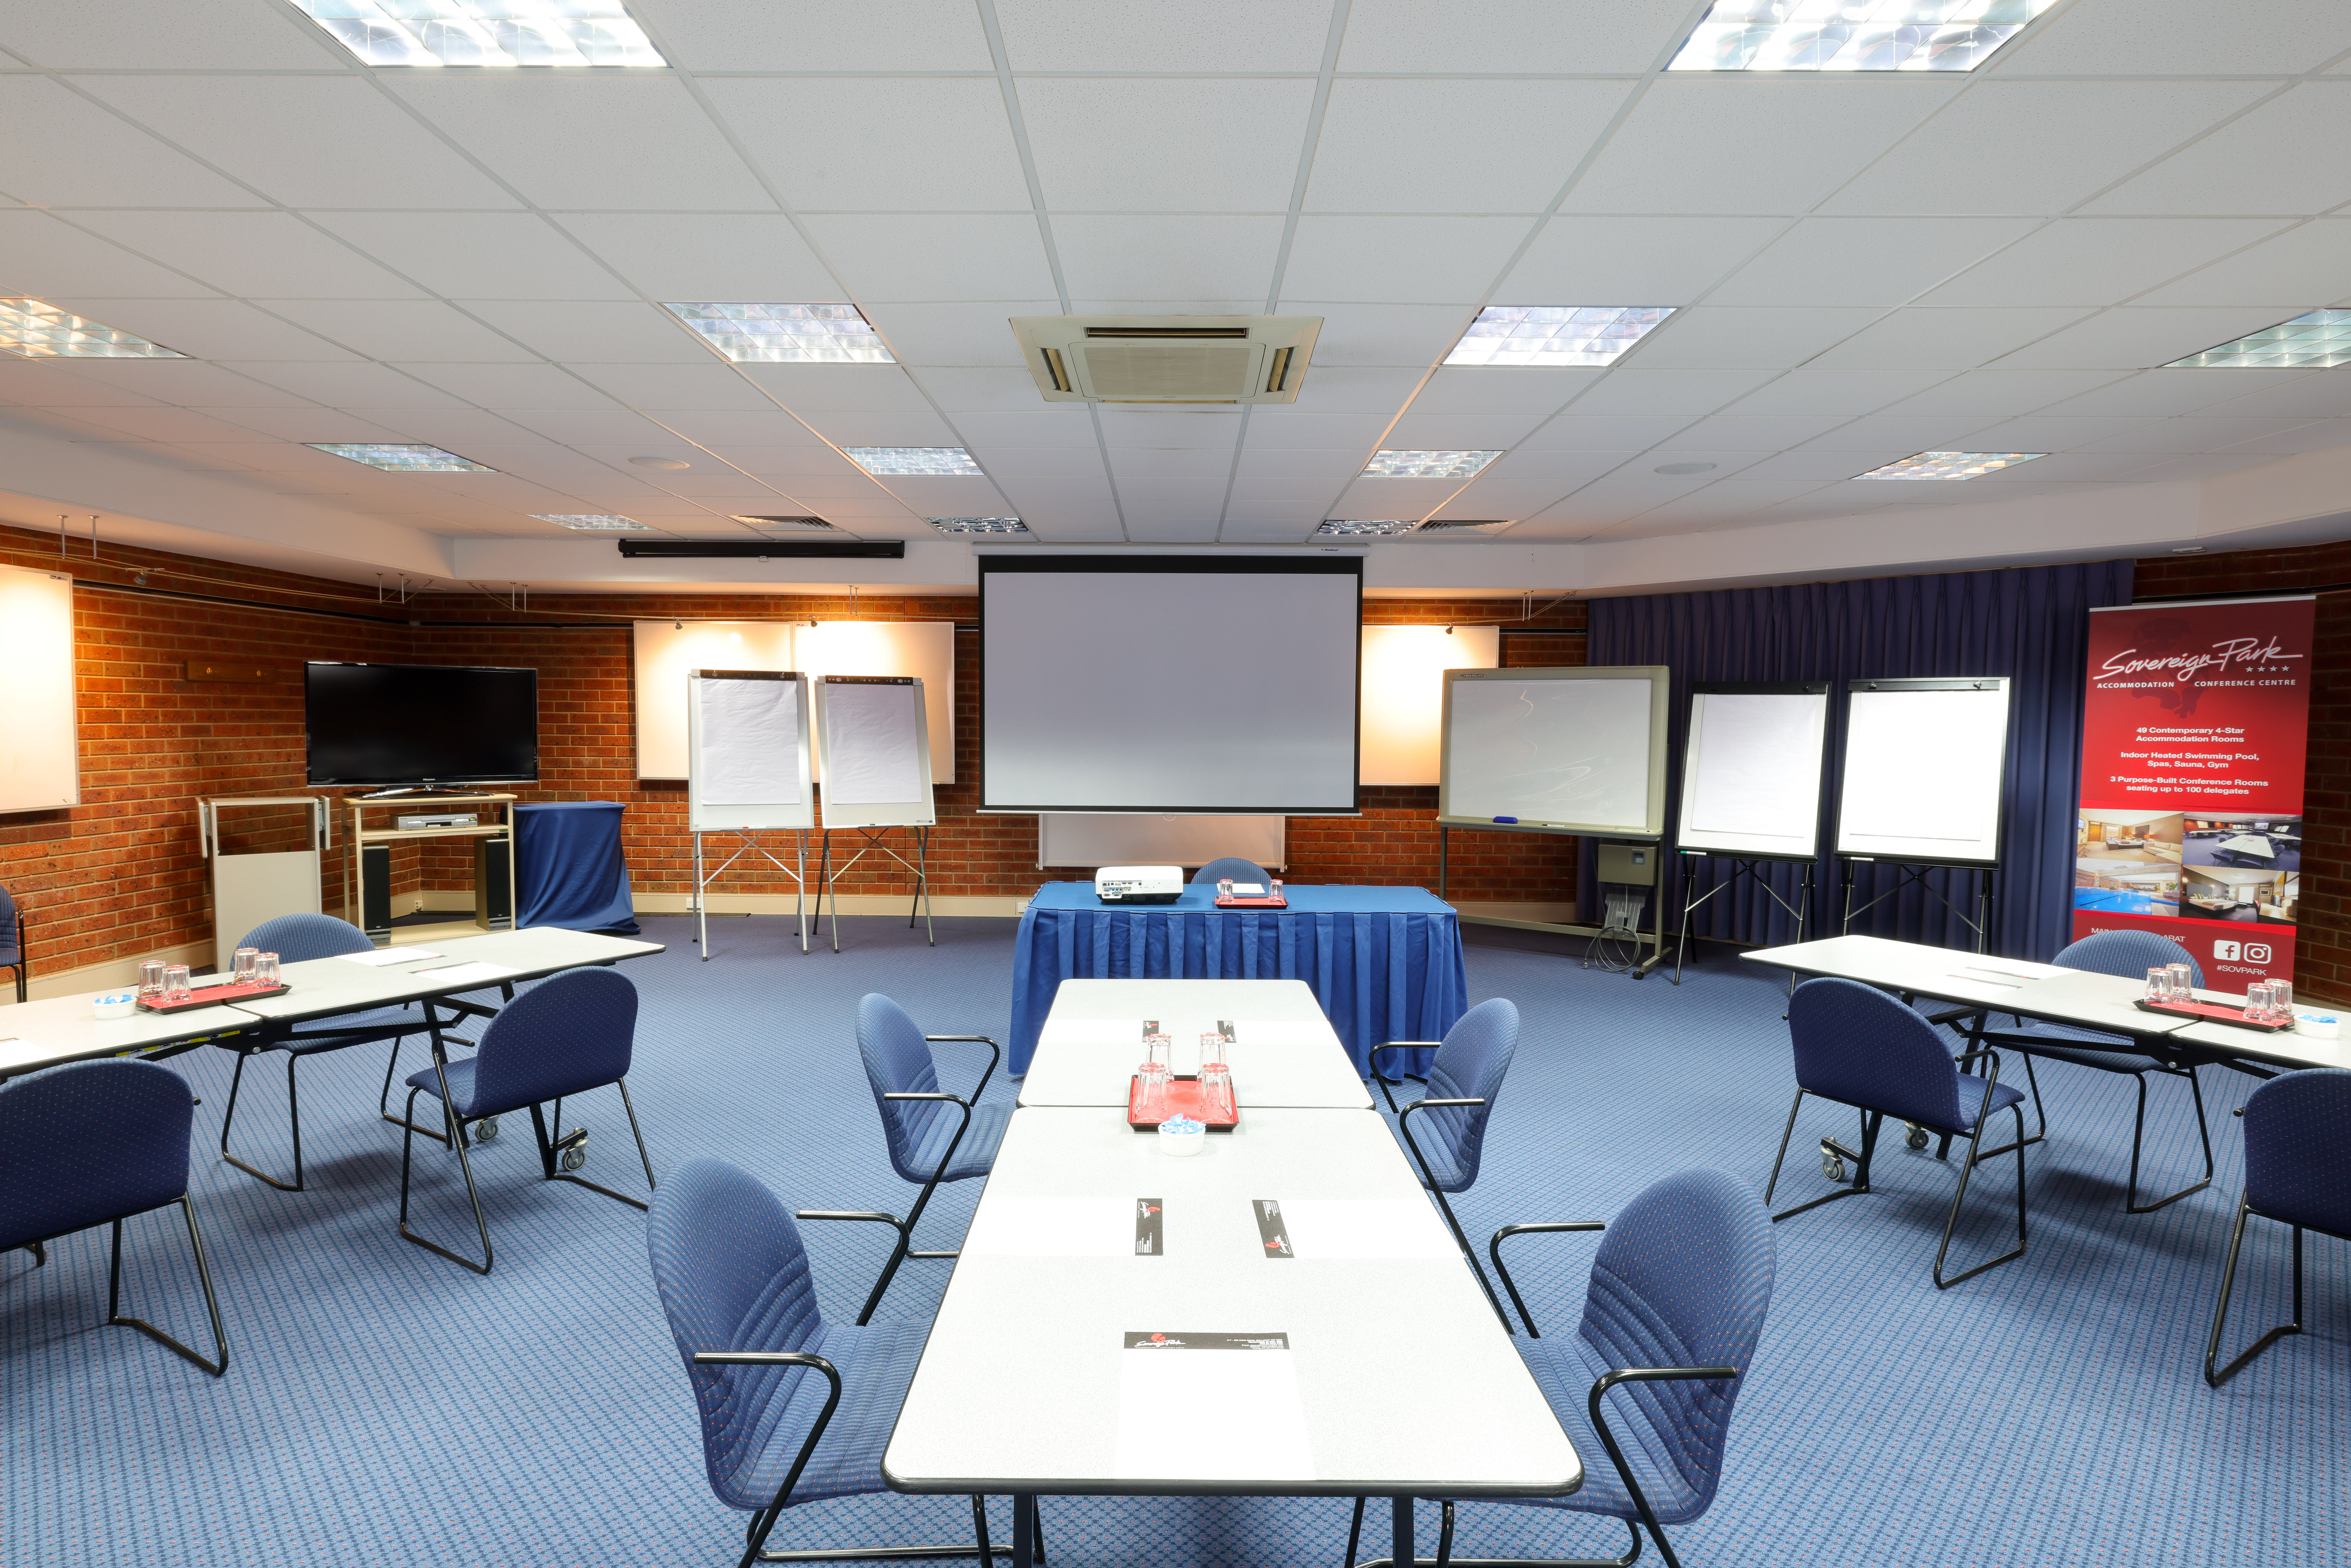 Our largest meeting space